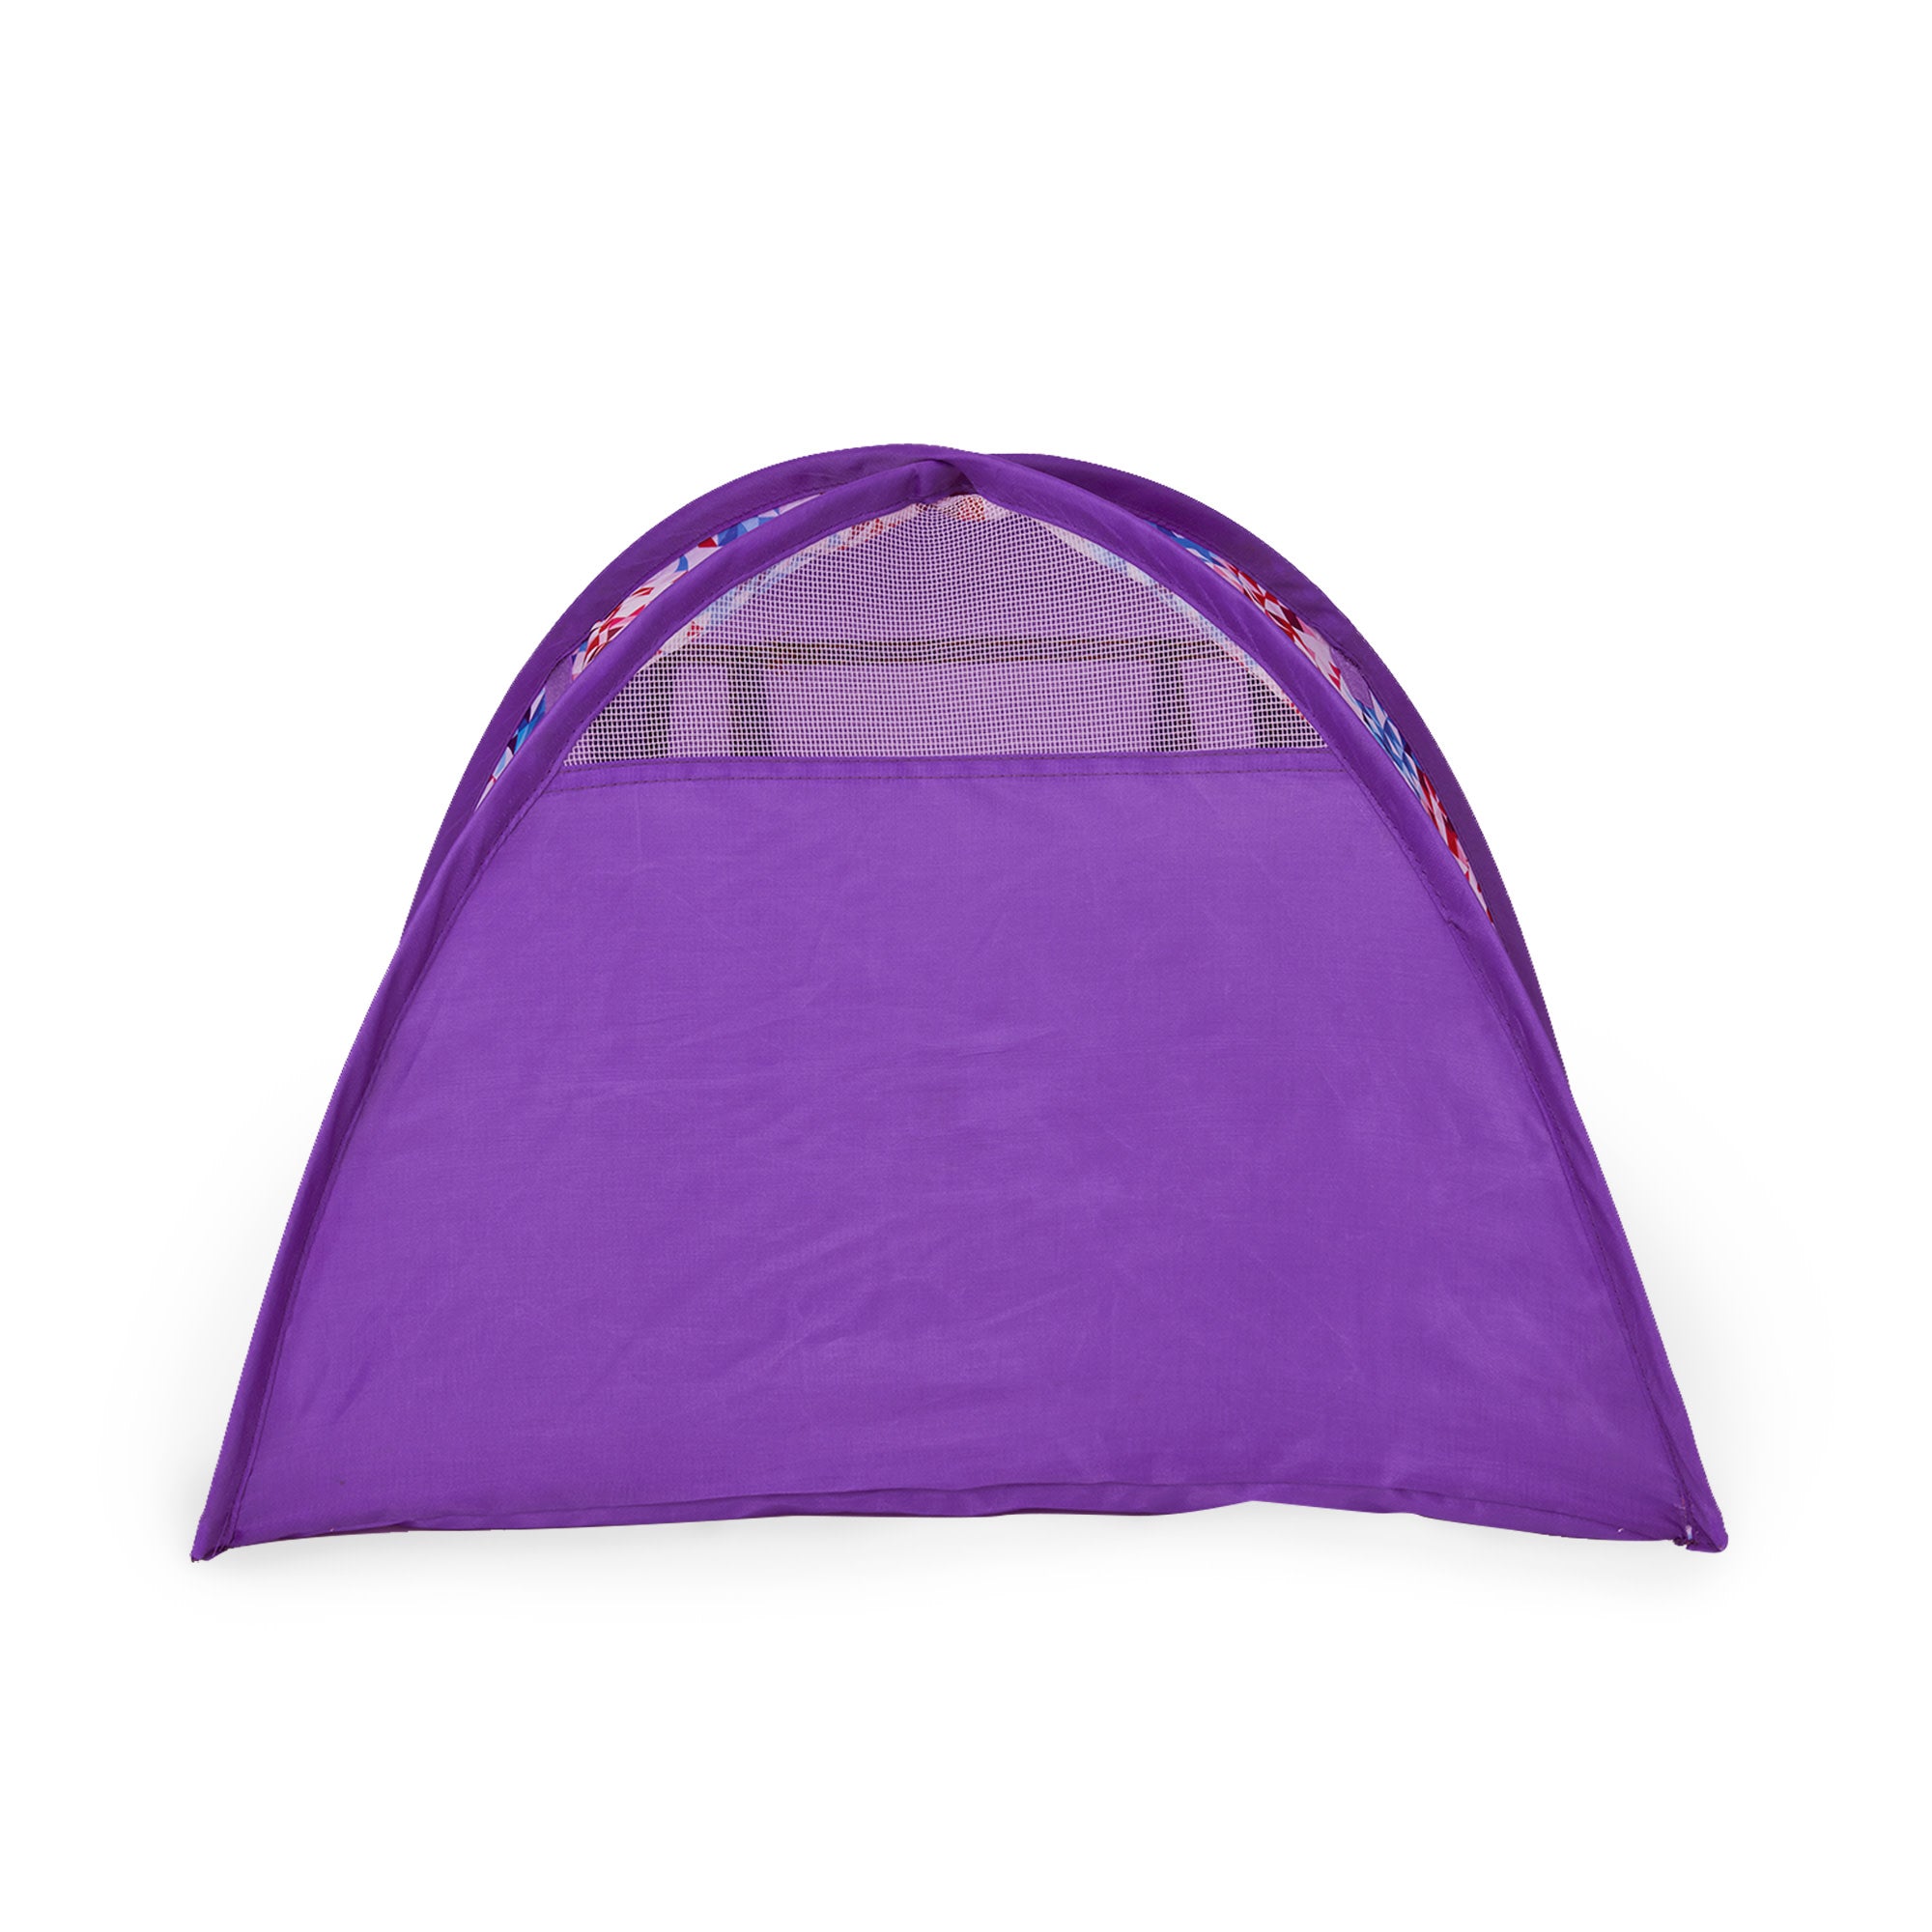 Sophia's by Teamson Kids Camping Tent and Sleeping Bag Set for 18" Dolls, Purple/Pink